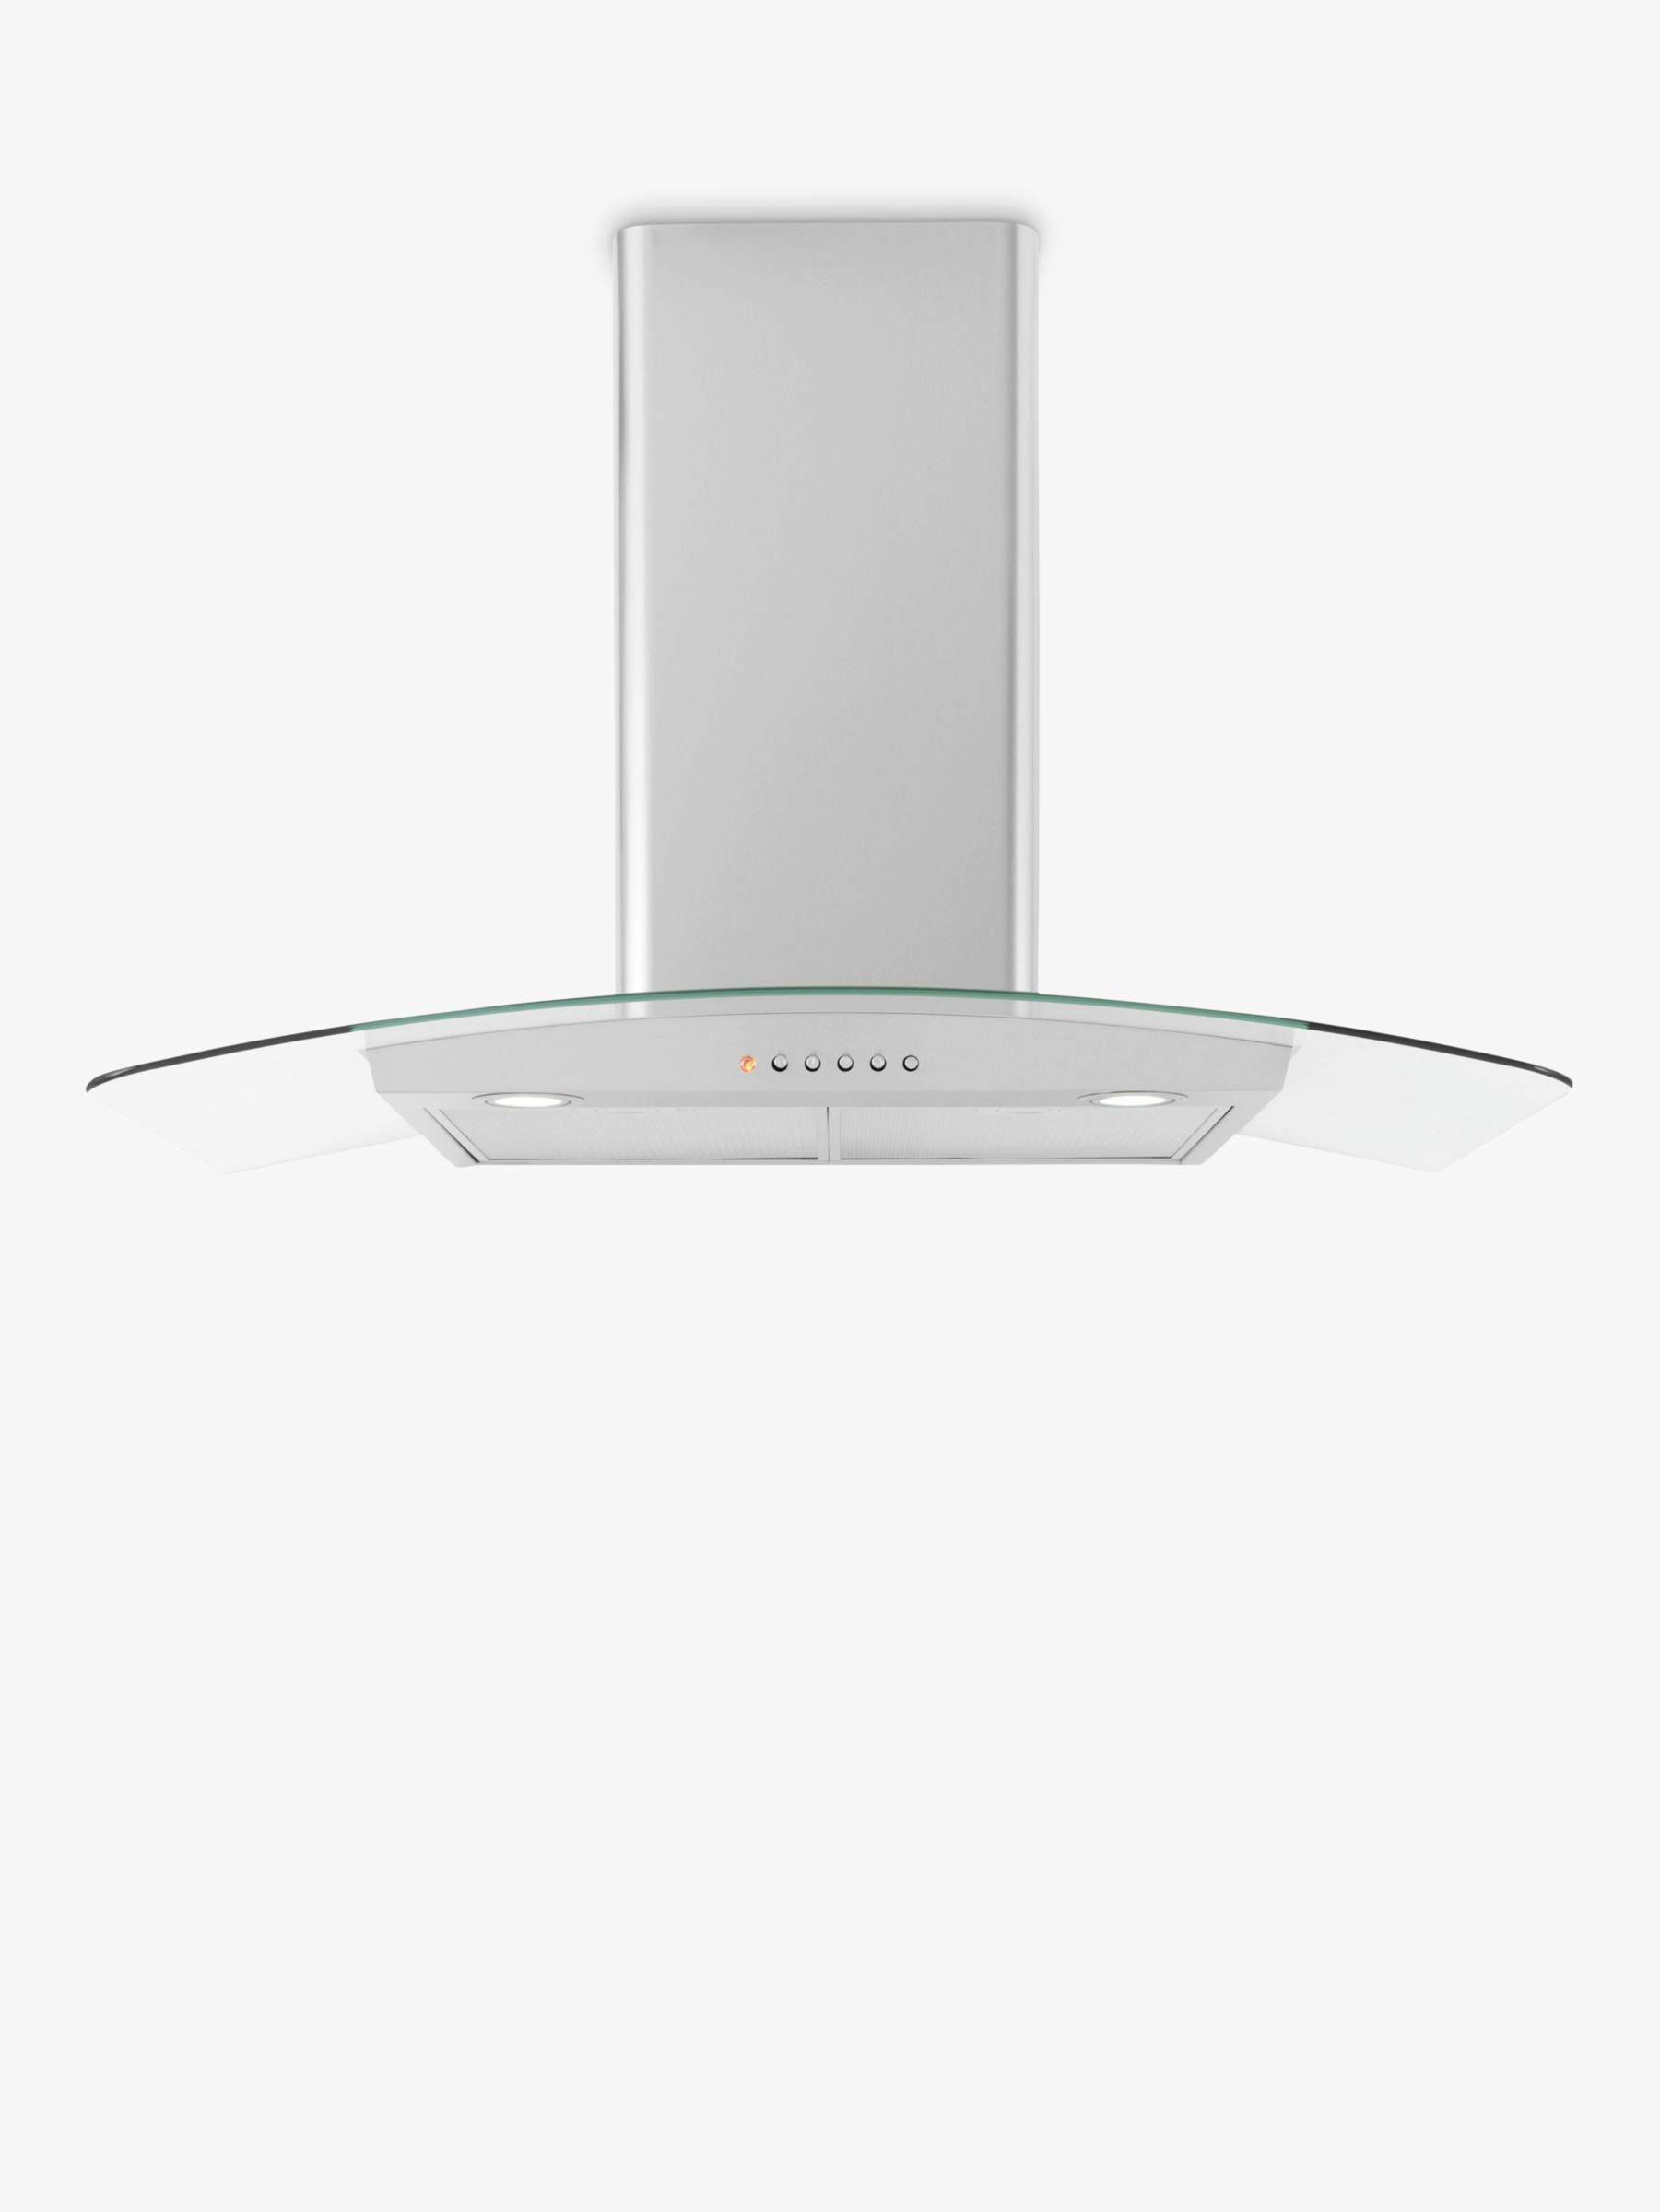 John Lewis & Partners JLHDA923 Chimney Cooker Hood, Stainless Steel and Curved Clear Glass